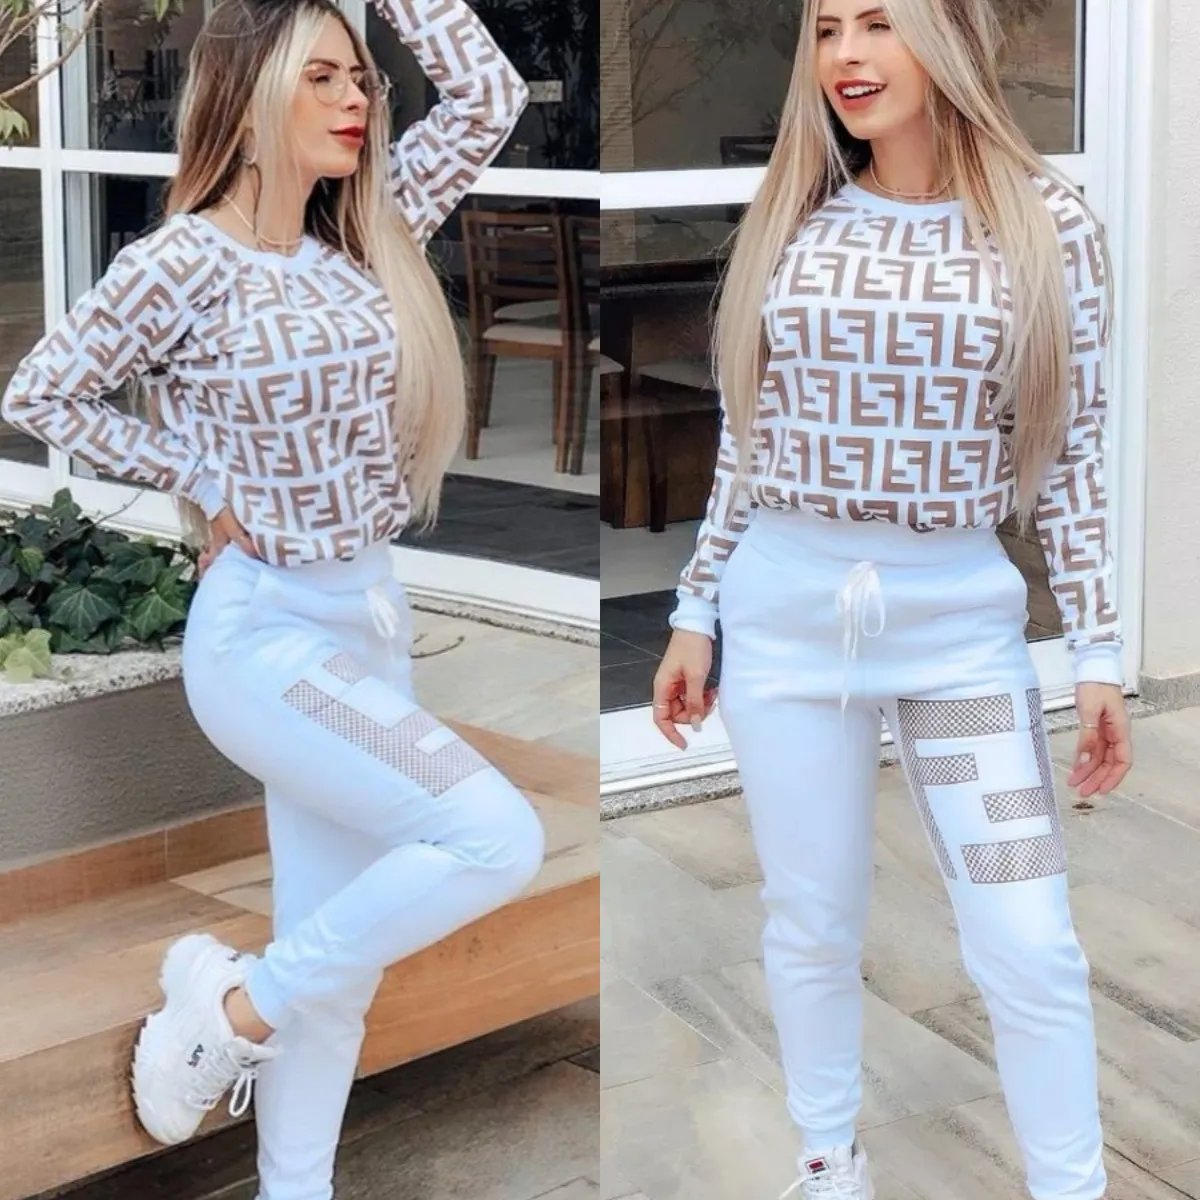 🔥🌄Women Fashion Letter Printed Round Neck Two Piece Set
#onlineshopping #smallbusiness #onlineshop #trendy #fashiontrends #supplier #streetstyle #fashion #womenfashion #womenstyle 
#womenswear #apparel #clothingsupplier #wholesaleapparel #womensets #sets #twopiecesset